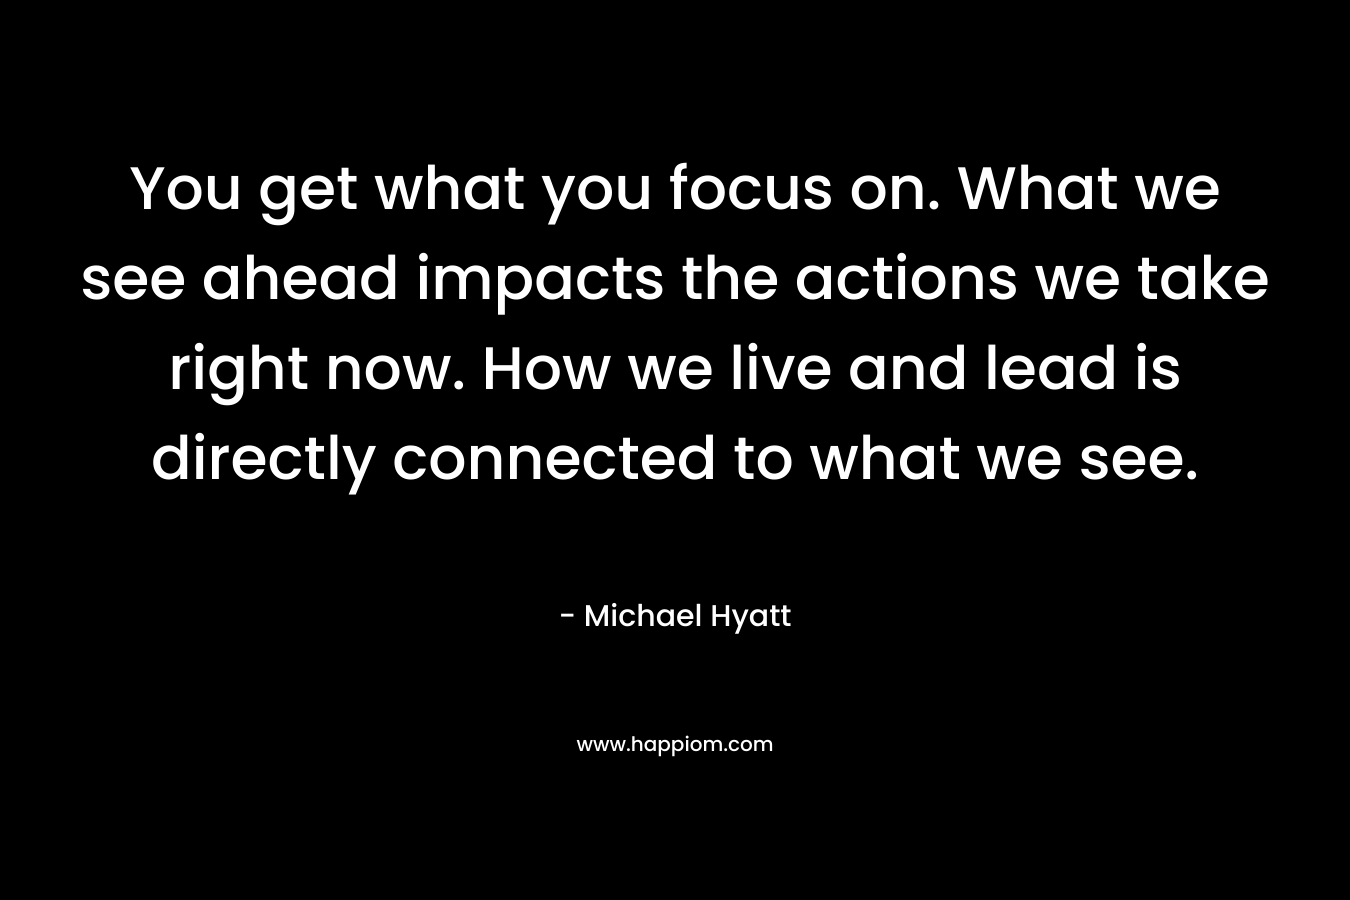 You get what you focus on. What we see ahead impacts the actions we take right now. How we live and lead is directly connected to what we see. – Michael Hyatt